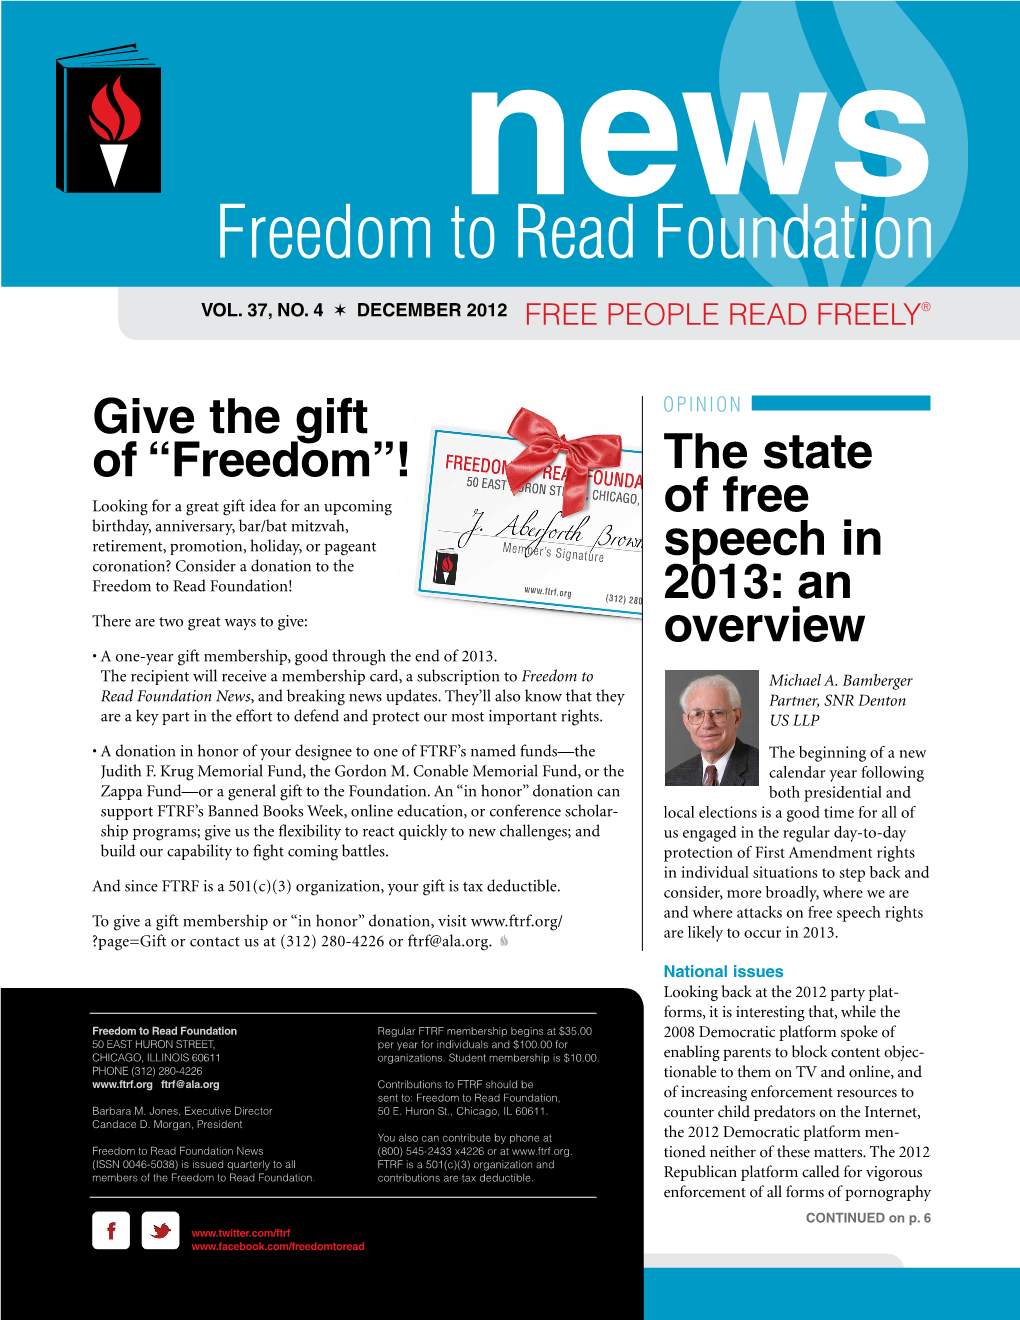 Freedom to Read Foundation! 2013: an There Are Two Great Ways to Give: Overview • a One-Year Gift Membership, Good Through the End of 2013